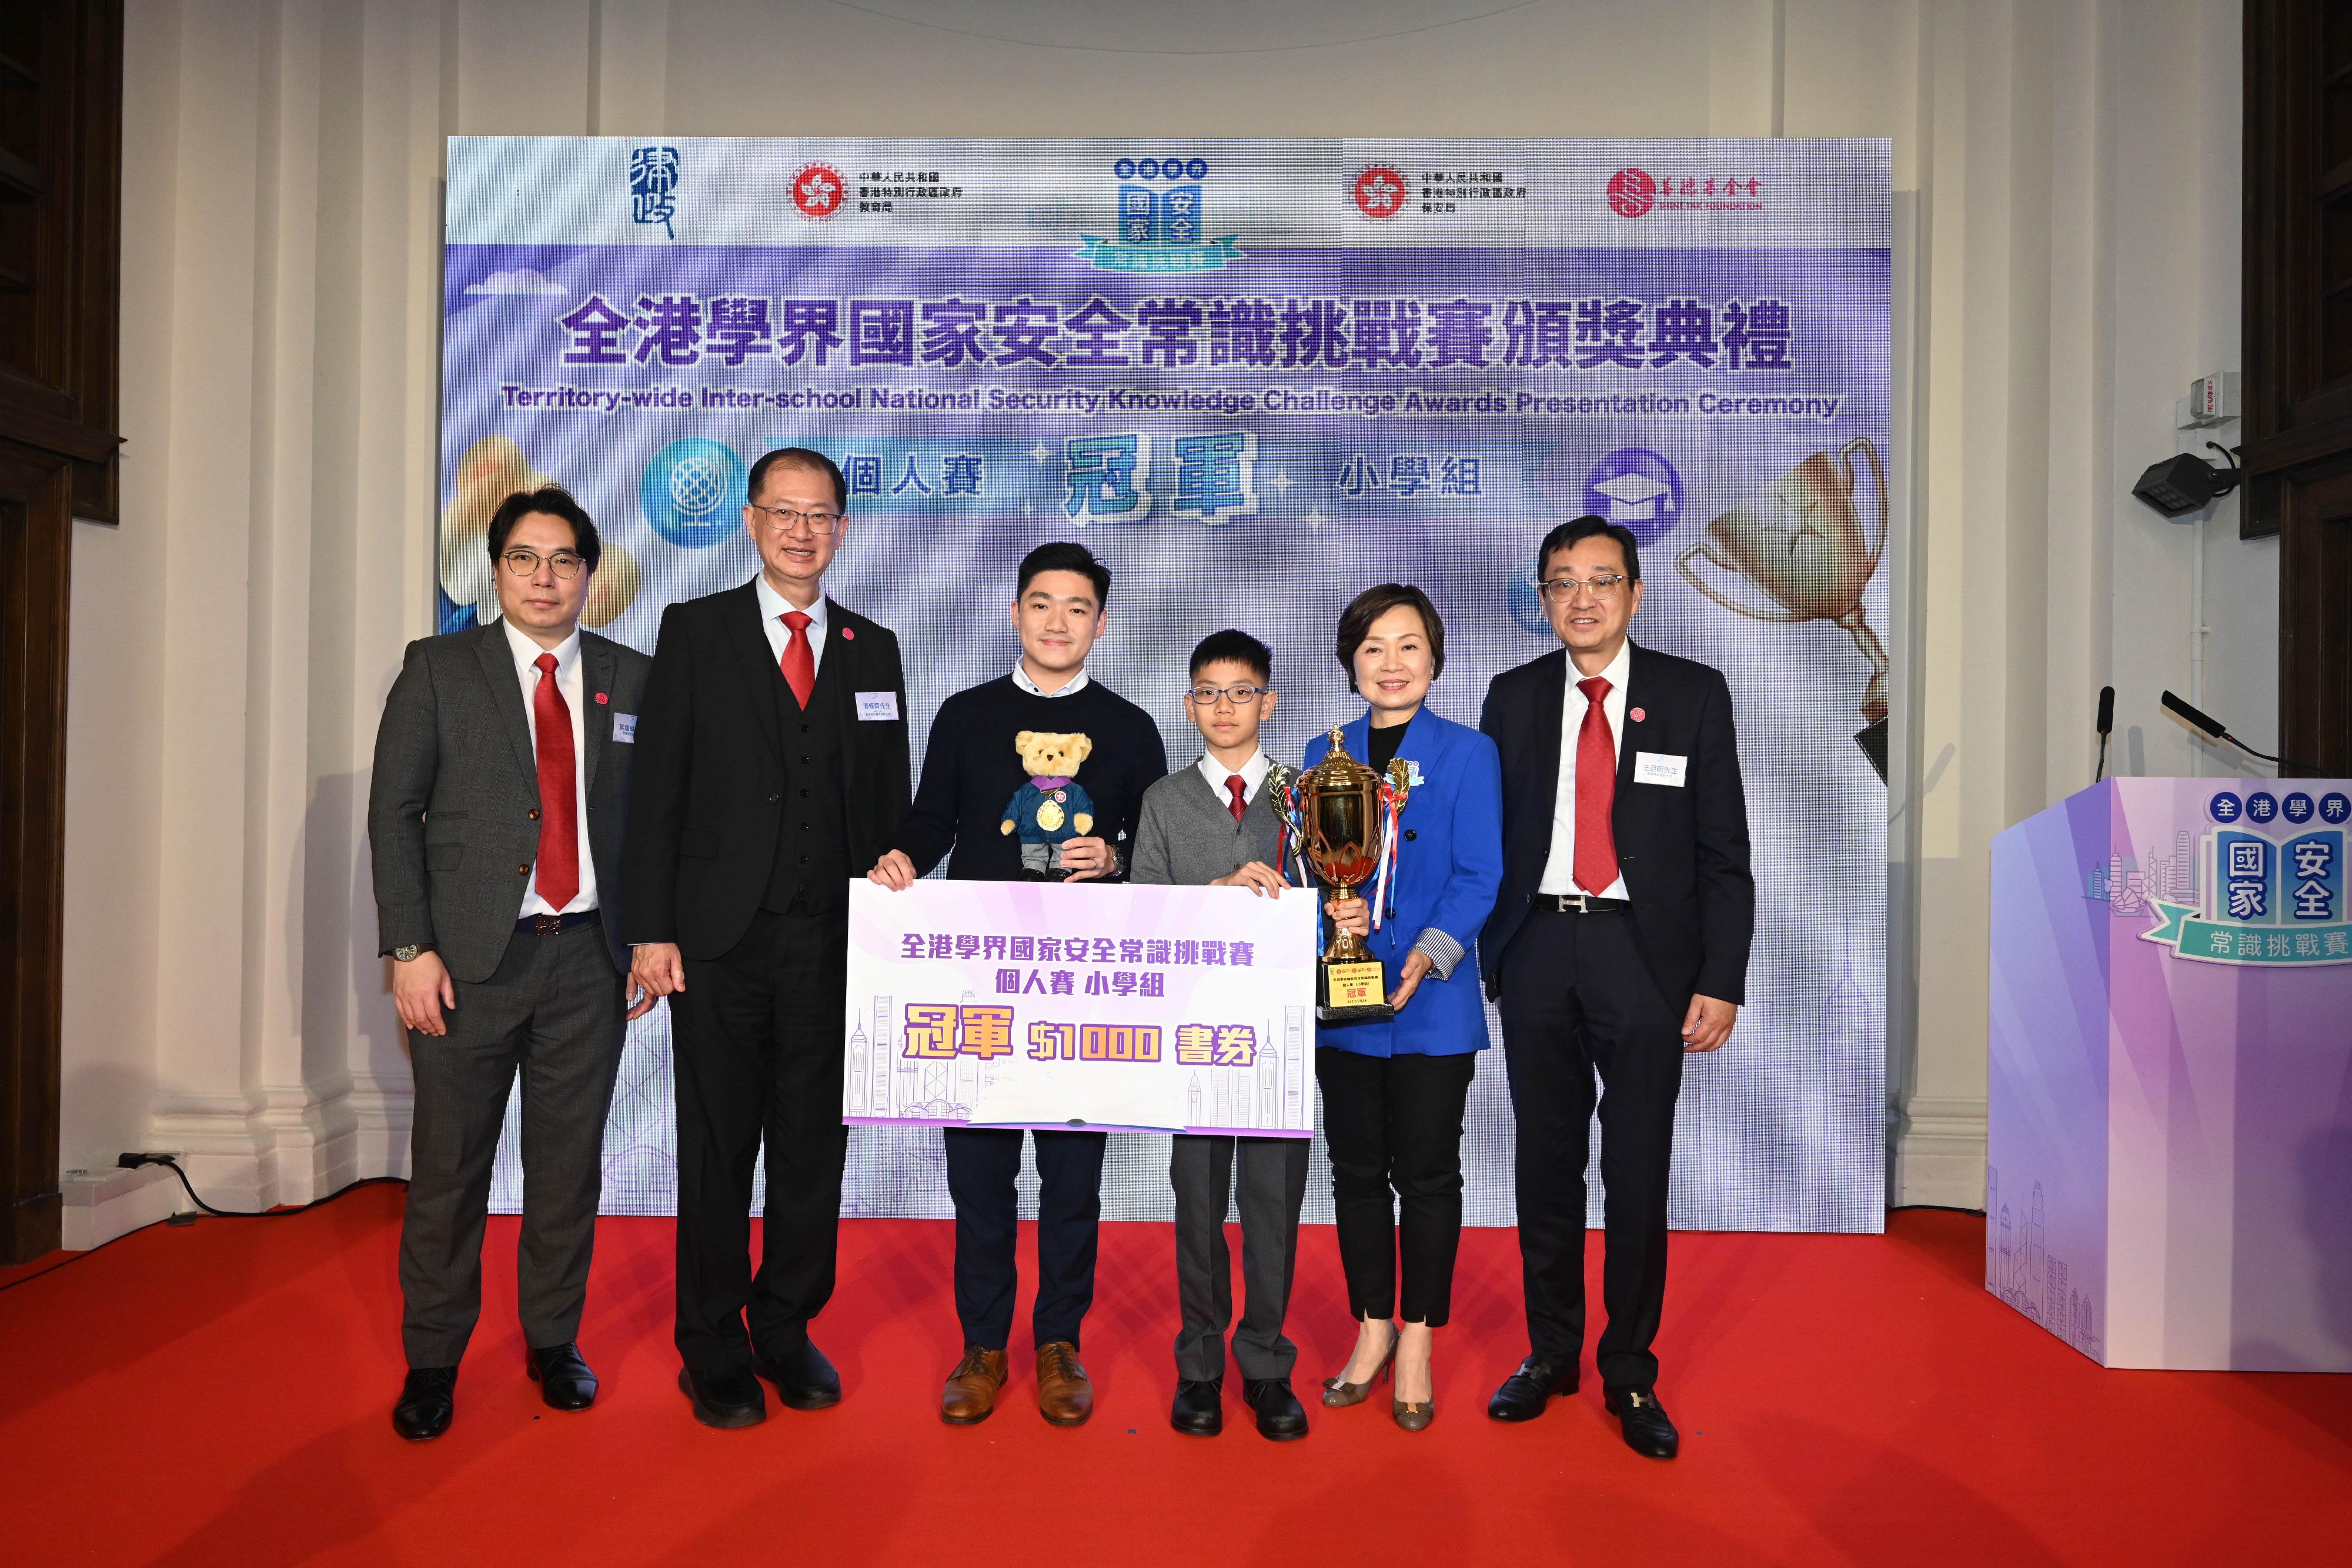 The Territory-wide Inter-school National Security Knowledge Challenge, jointly organised by the Department of Justice, the Security Bureau, the Education Bureau and the Hong Kong Shine Tak Foundation, held its finals this morning (February 26), and a prize presentation ceremony at the former French Mission Building in the afternoon. Photo shows the Secretary for Education, Dr Choi Yuk-lin (second right), and other guests presenting the Champion award of primary school individual competition to the winner from S.K.H. Fung Kei Millennium Primary School.